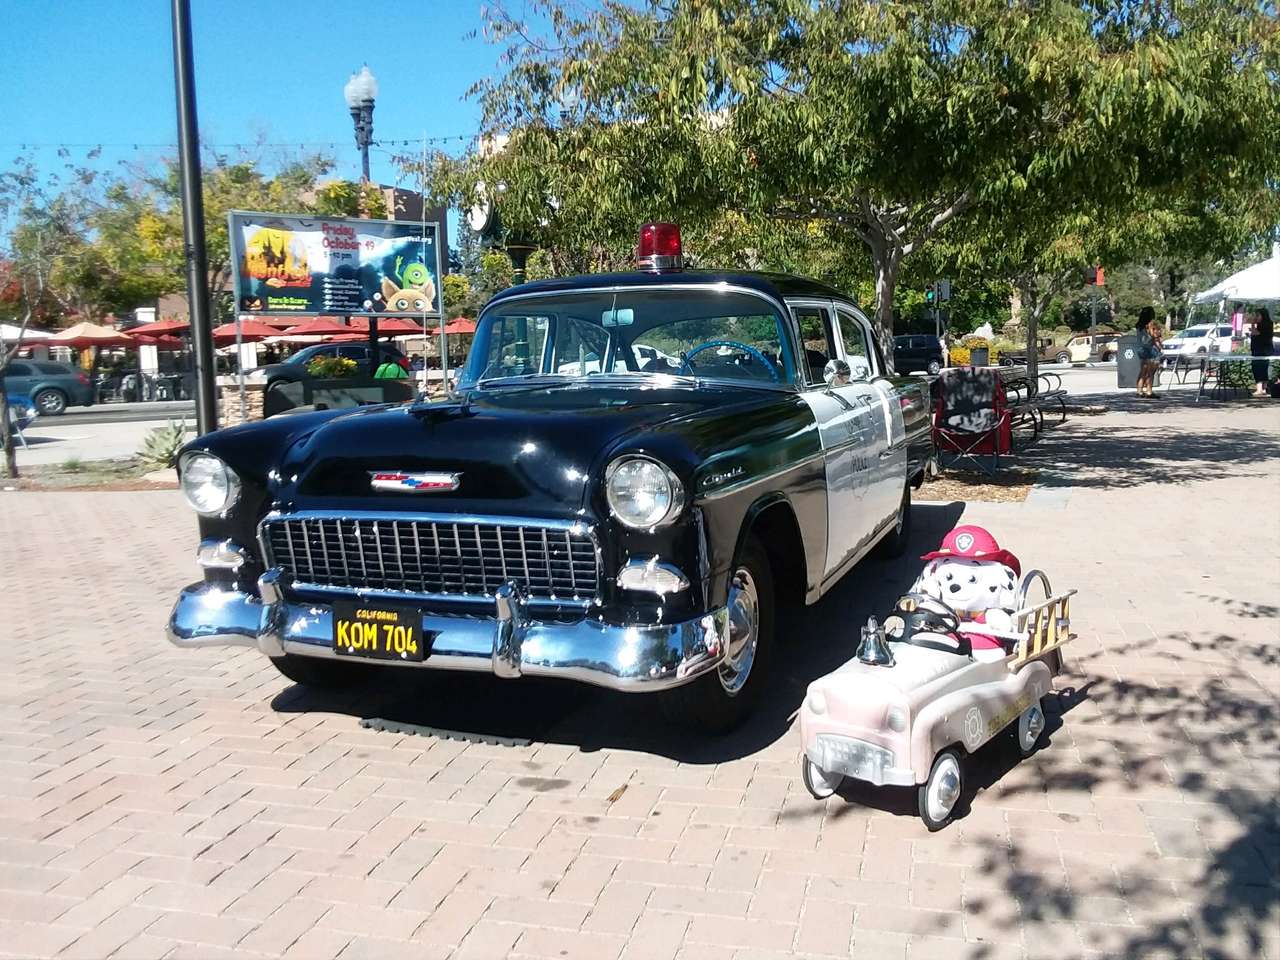 1955 chevy police car online puzzle